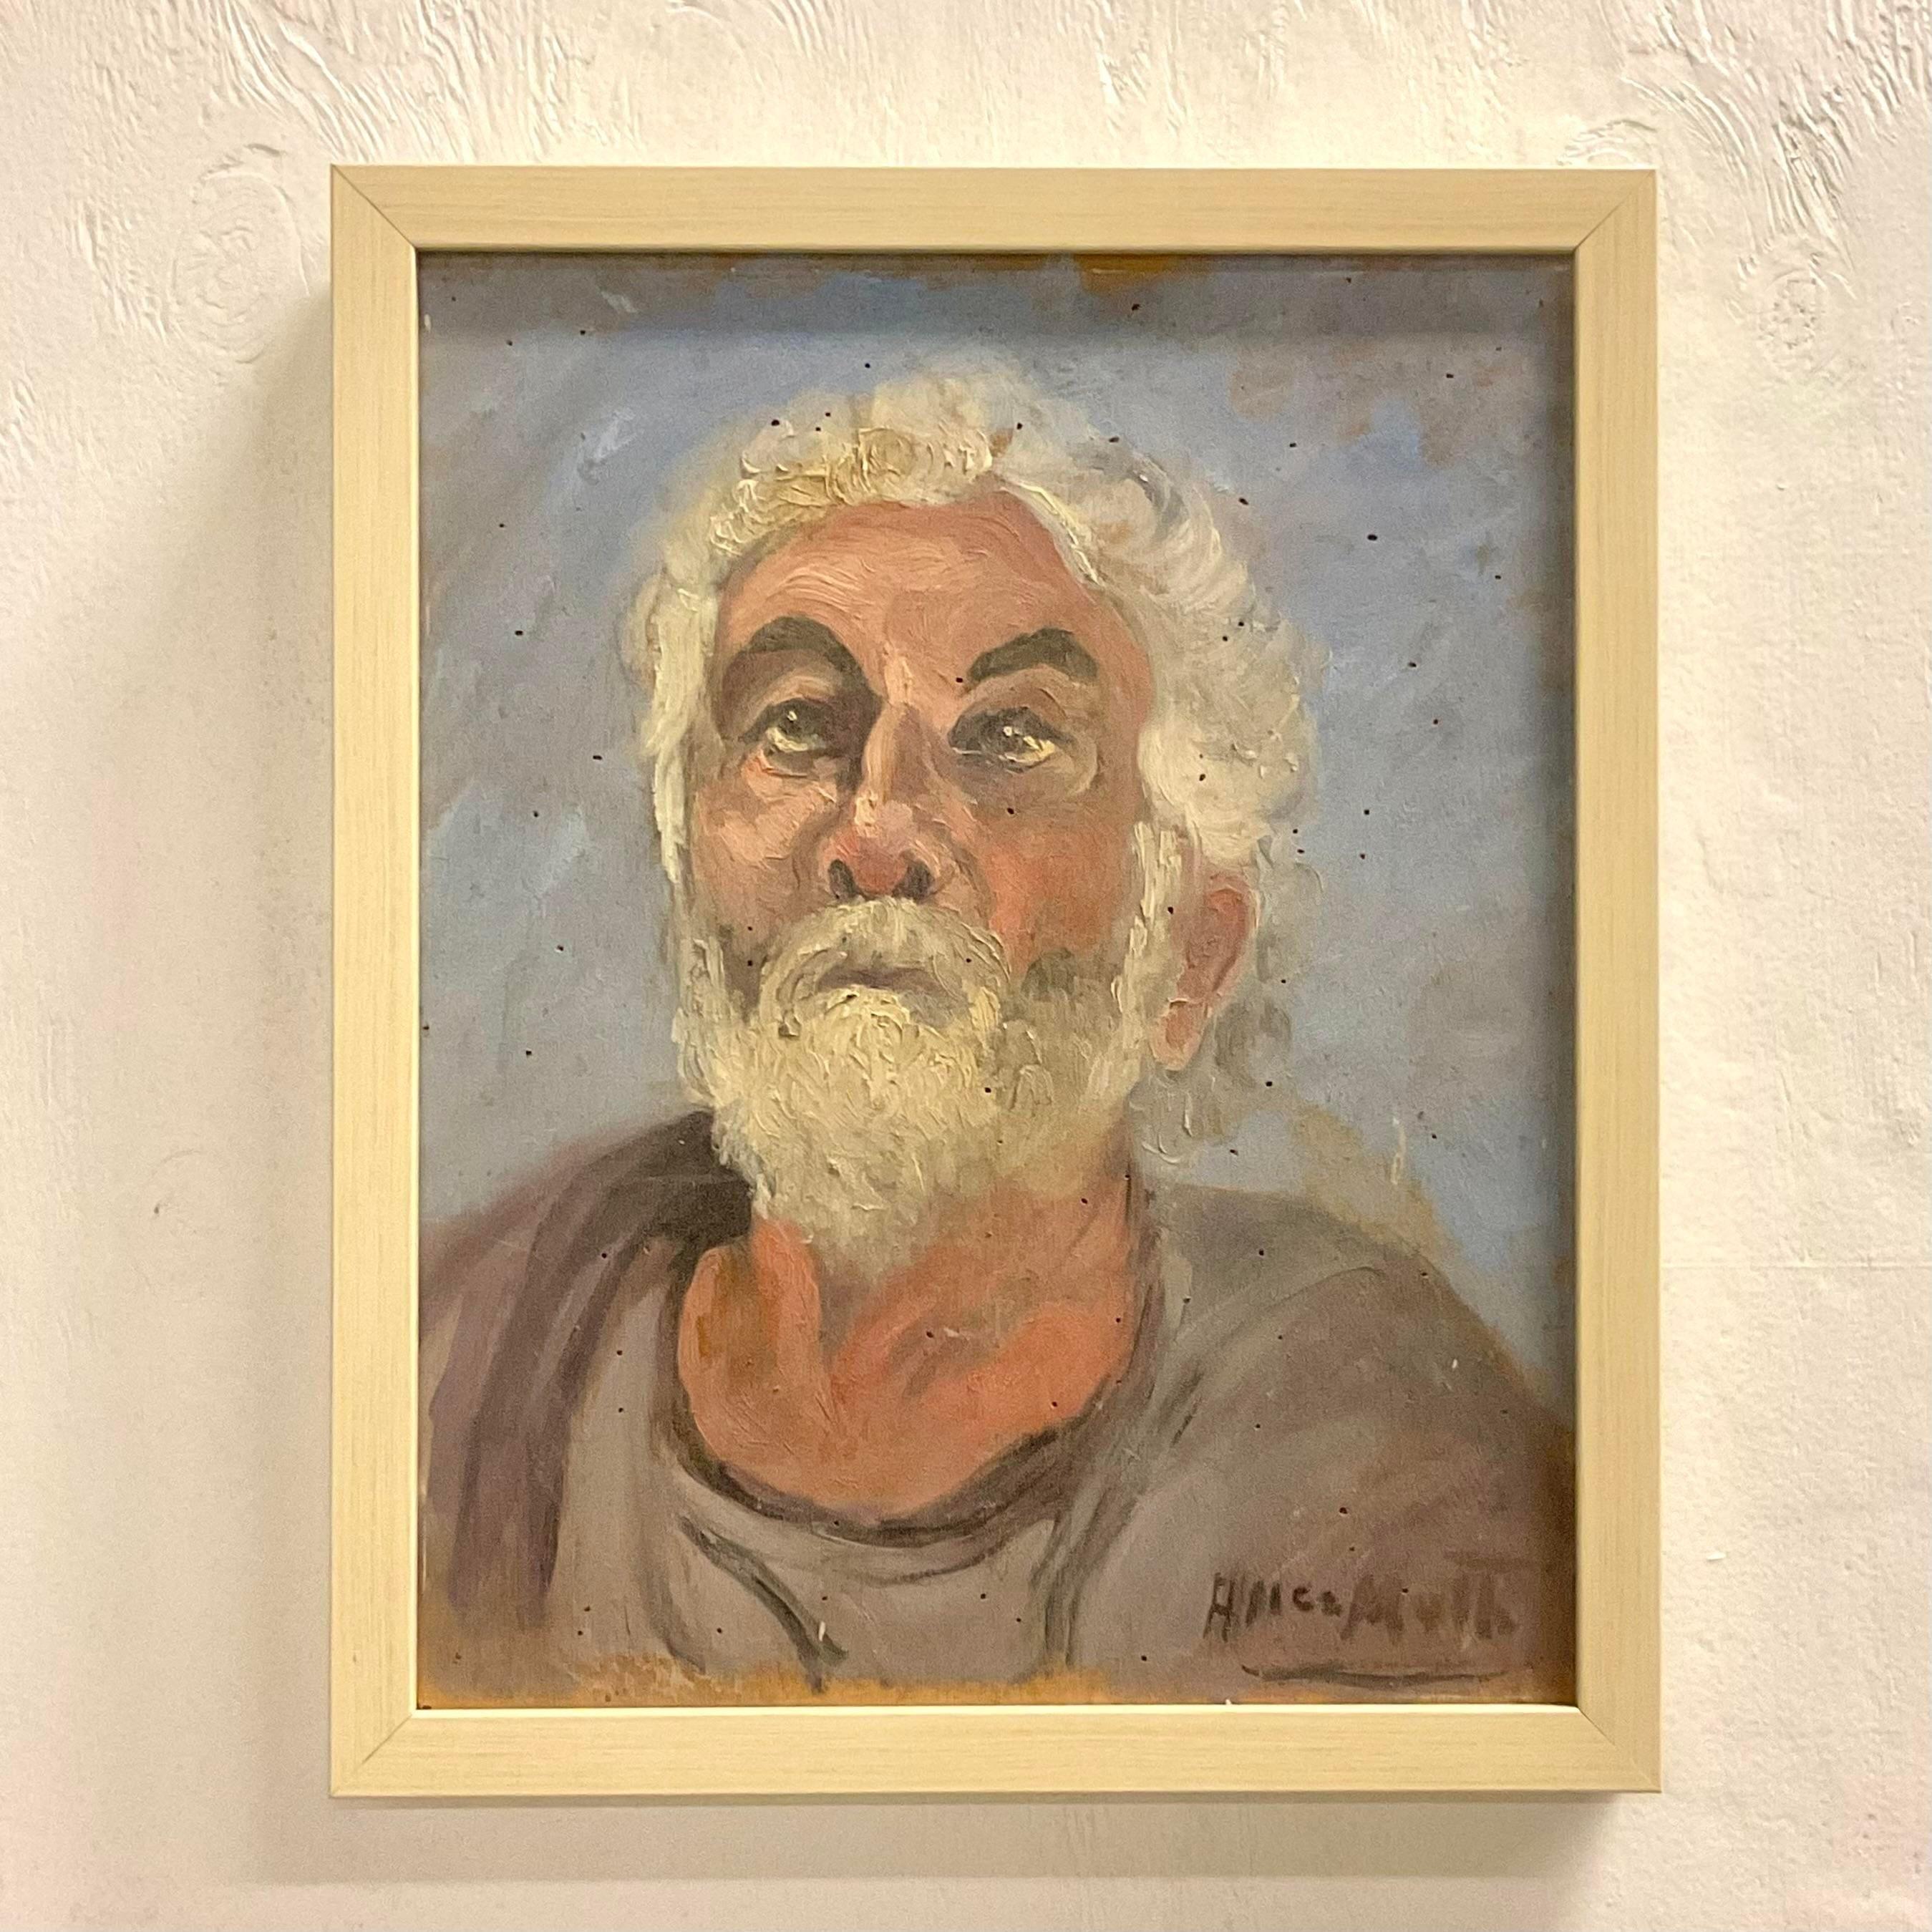 A fabulous vintage Boho original oil portrait. A chic composition of a weathered older man in chic colors. Newly framed. Signed by the artist. Acquired from a NY estate.